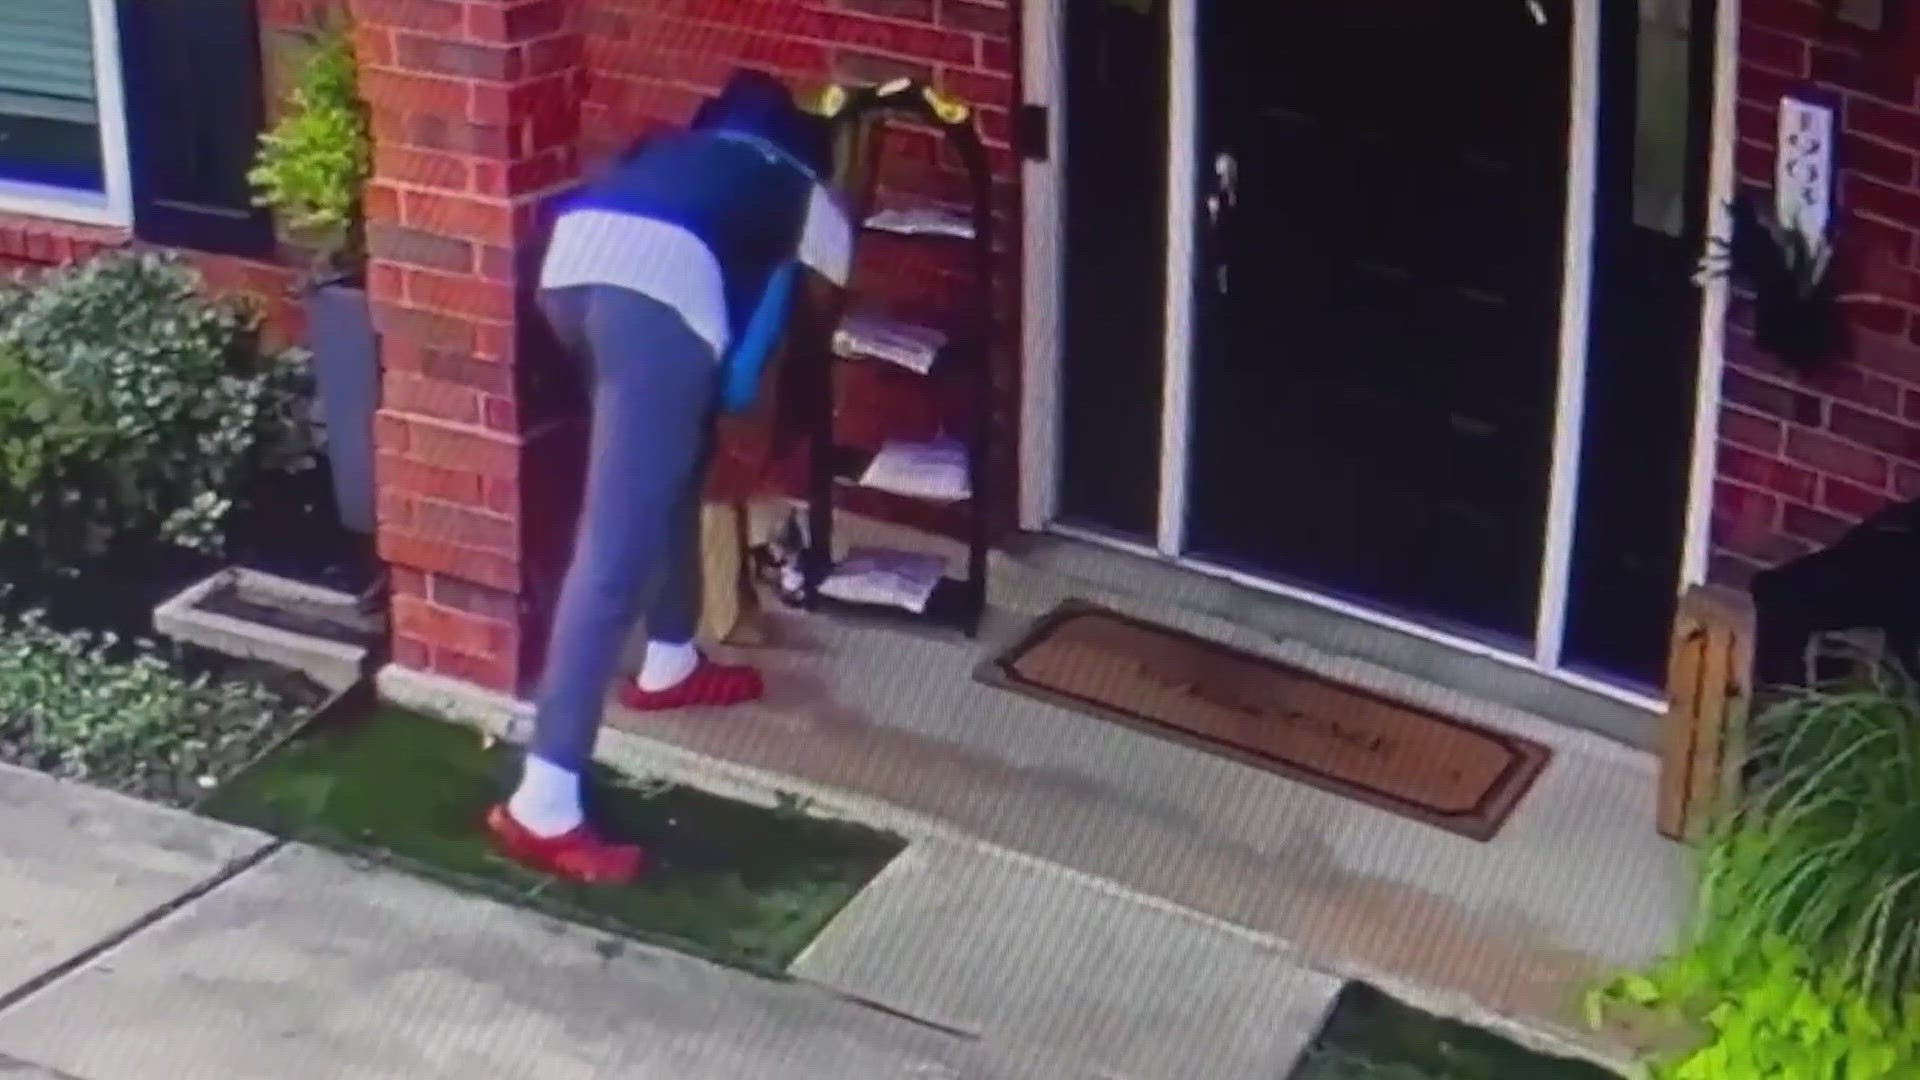 When she watched the surveillance video and saw the thief steal her packages, she knew she had to get revenge, even if it was a bit "immature."